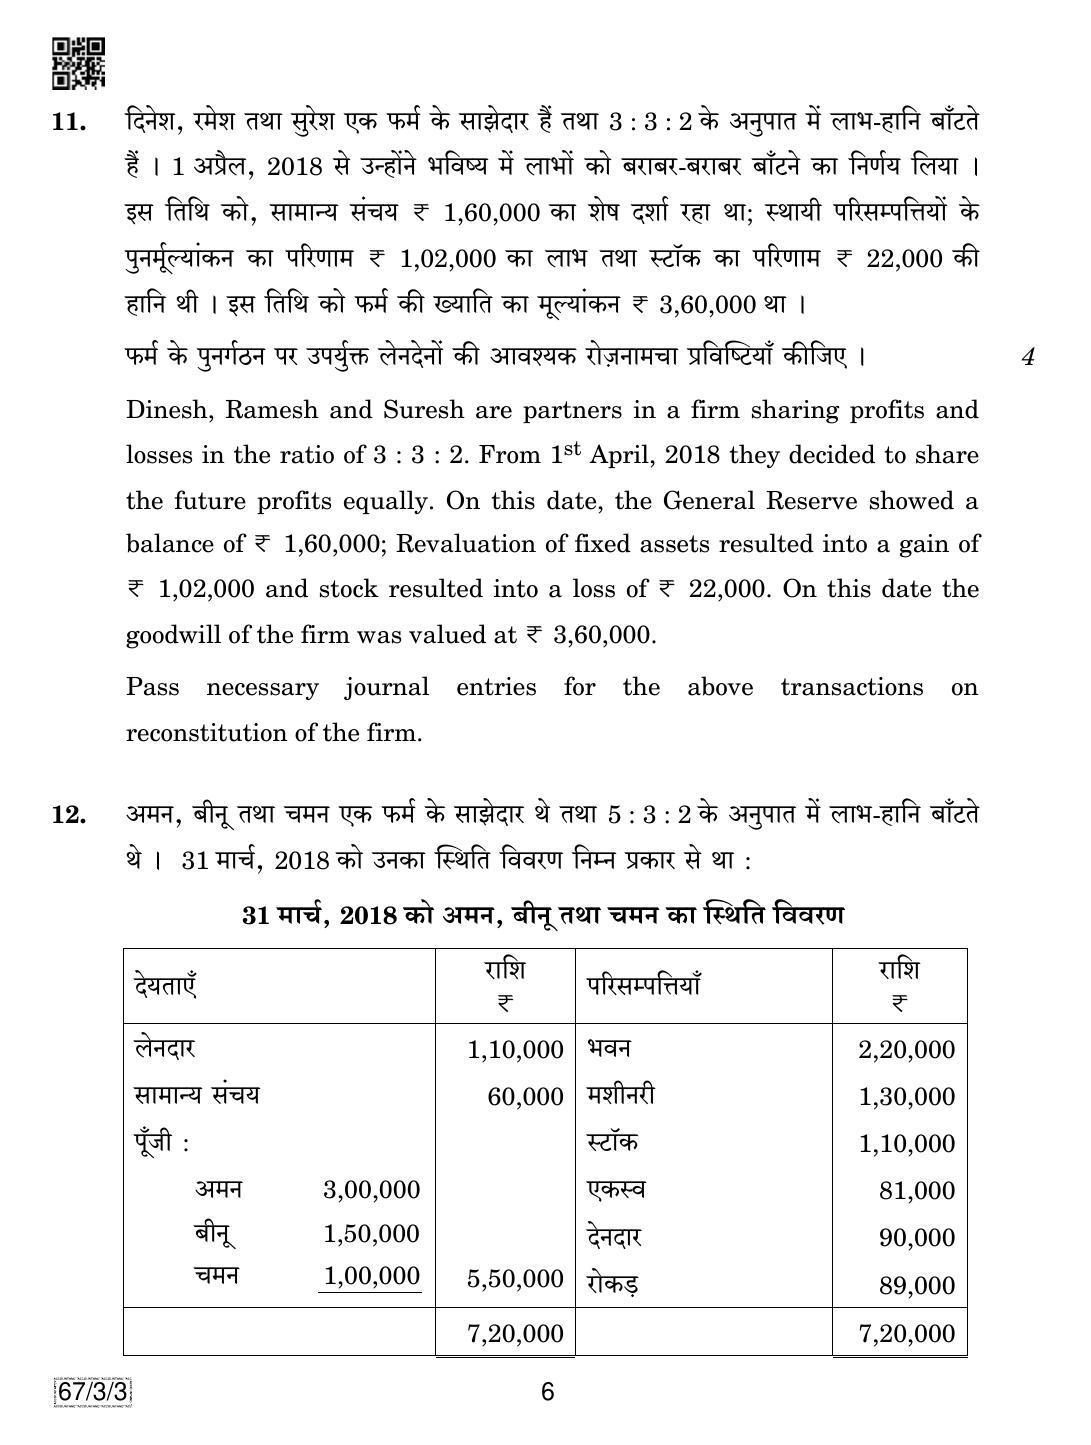 CBSE Class 12 67-3-3 Accountancy 2019 Question Paper - Page 6